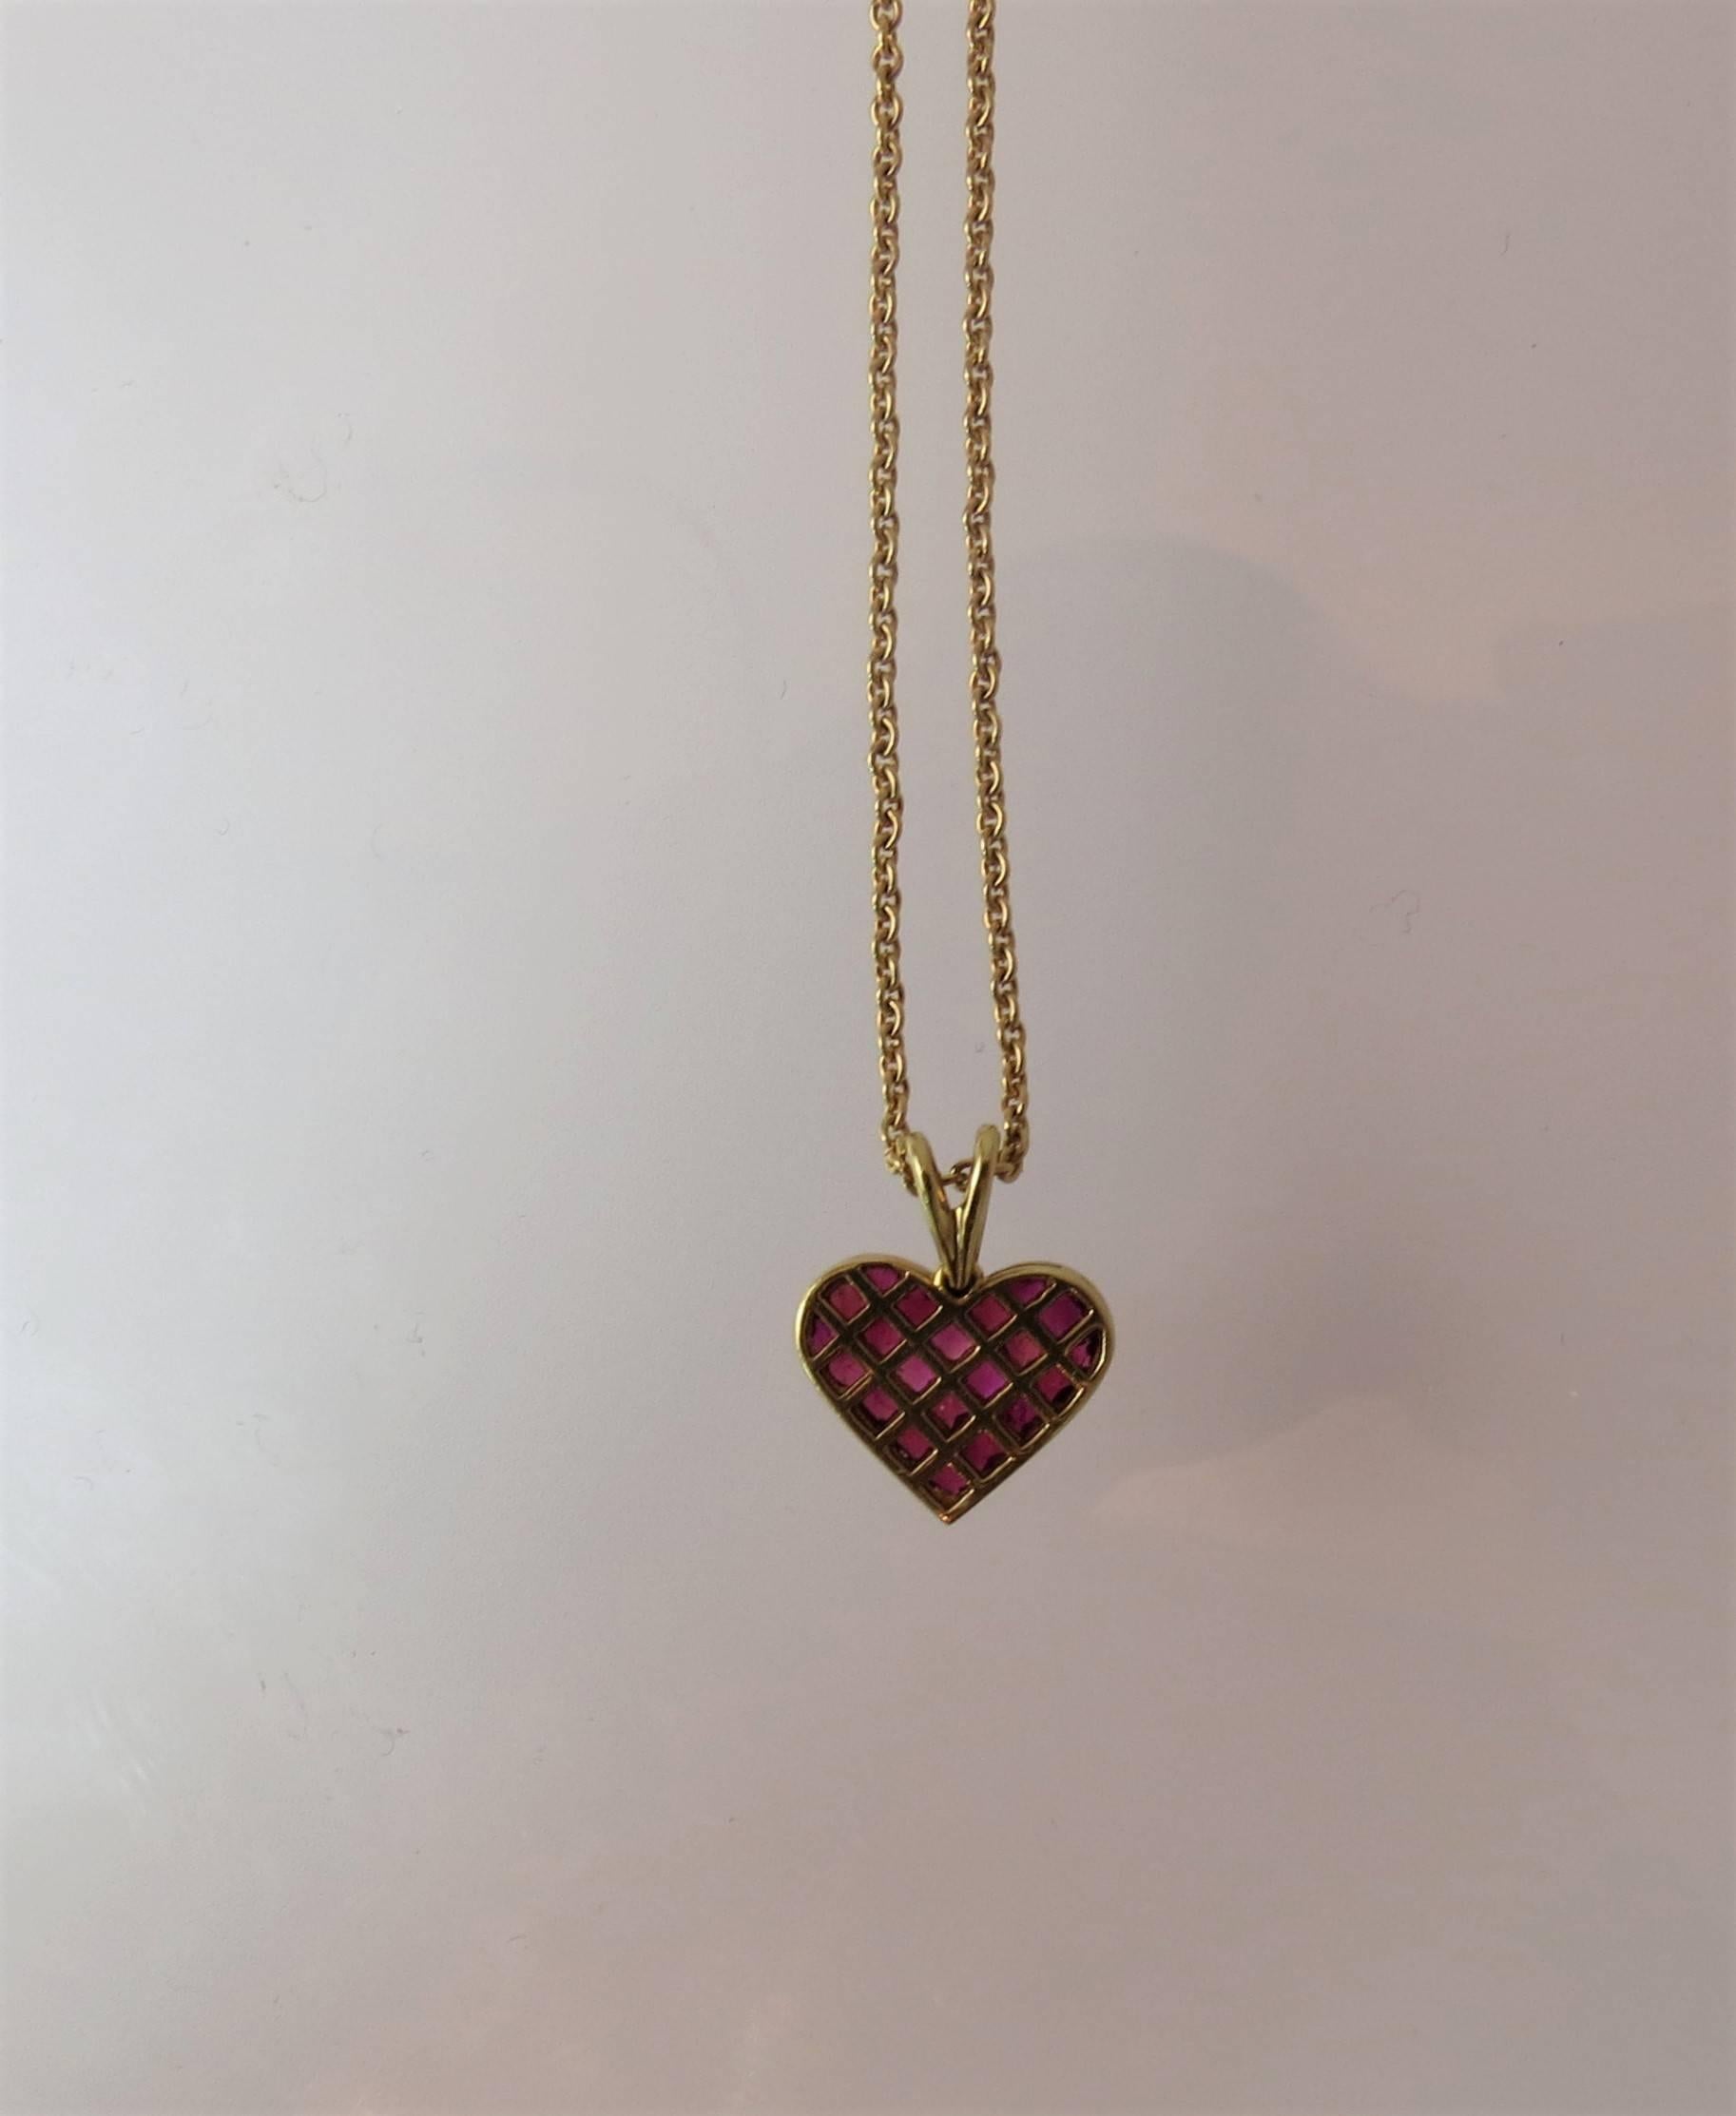 Ambar 18K yellow gold and ruby heart pendant, set with 21 quadrillion rubies, weighing 1.46cts suspended from 18K yellow gold 18.5 inch chain.